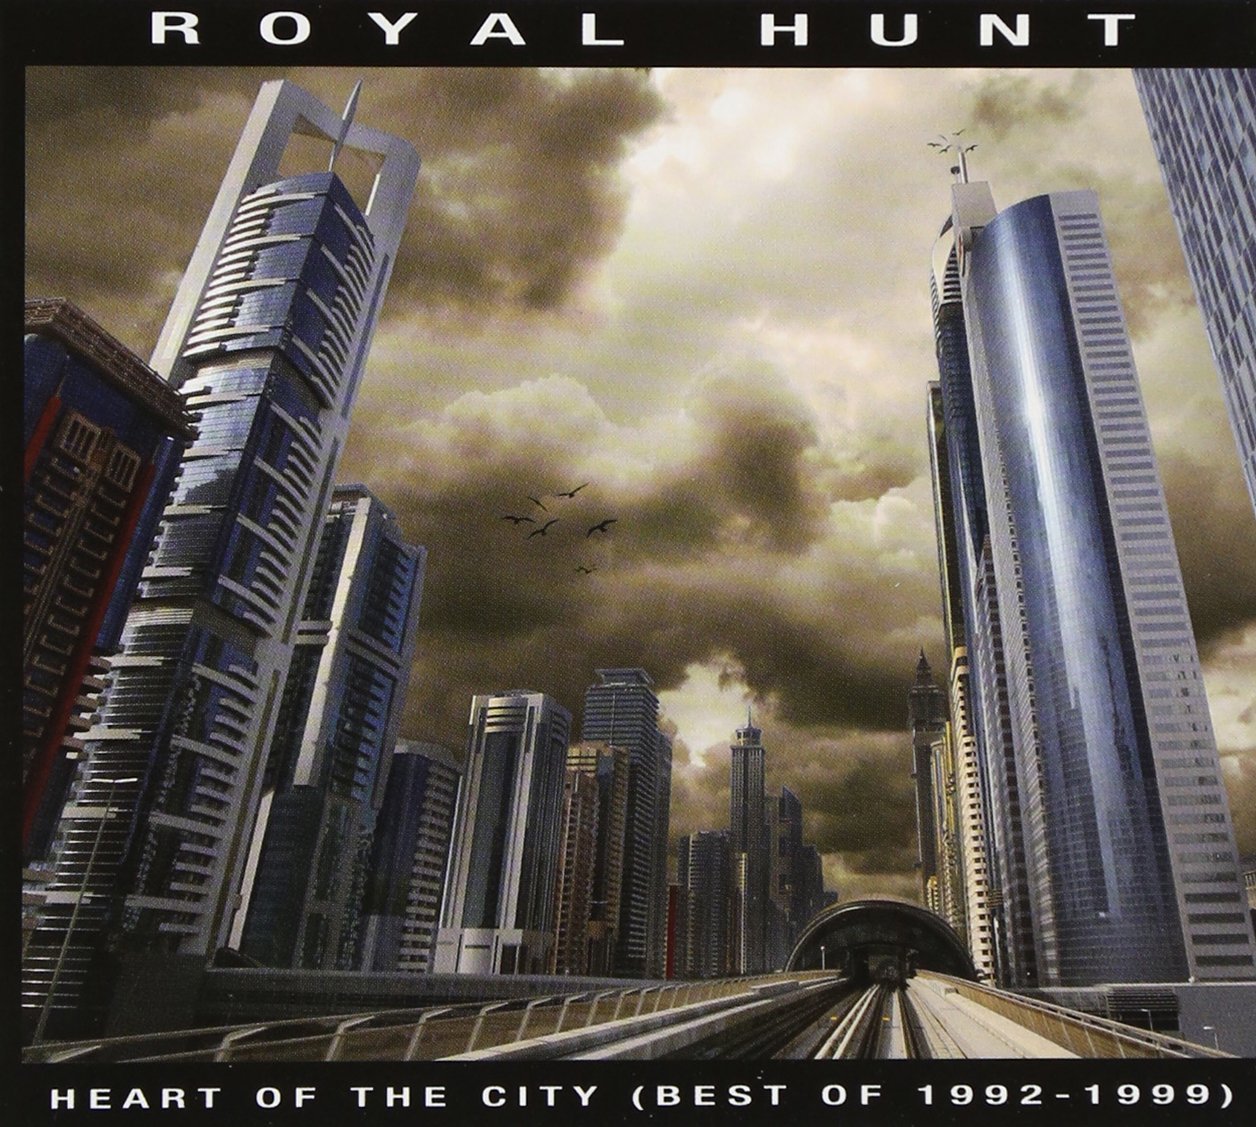 Heart of the City (Best of 1992-1999)